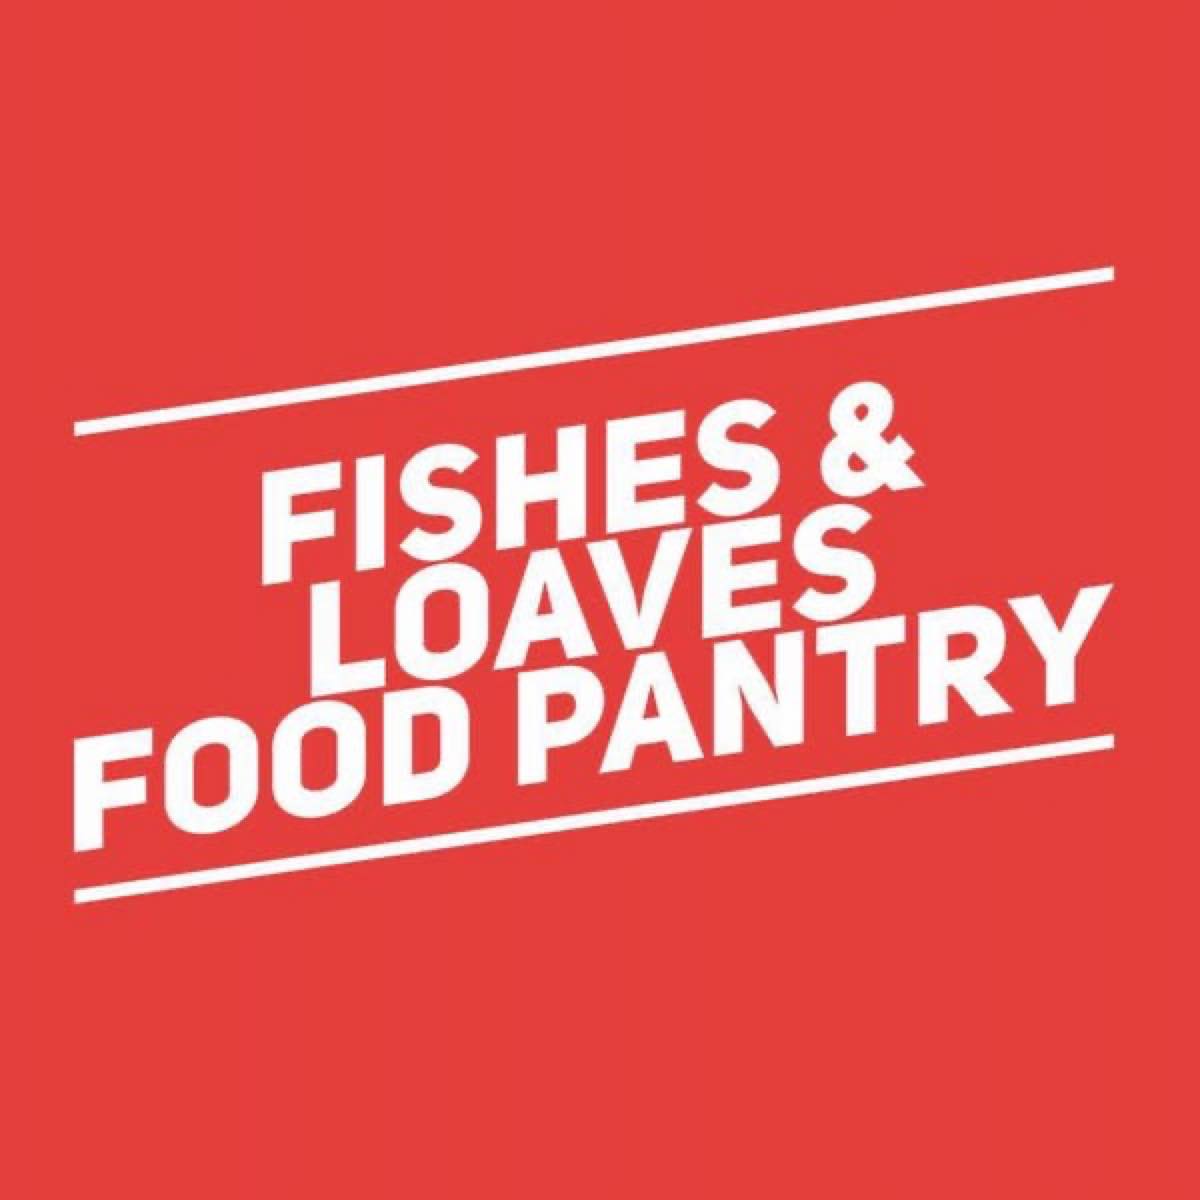 Fishes and Loaves Food Pantry